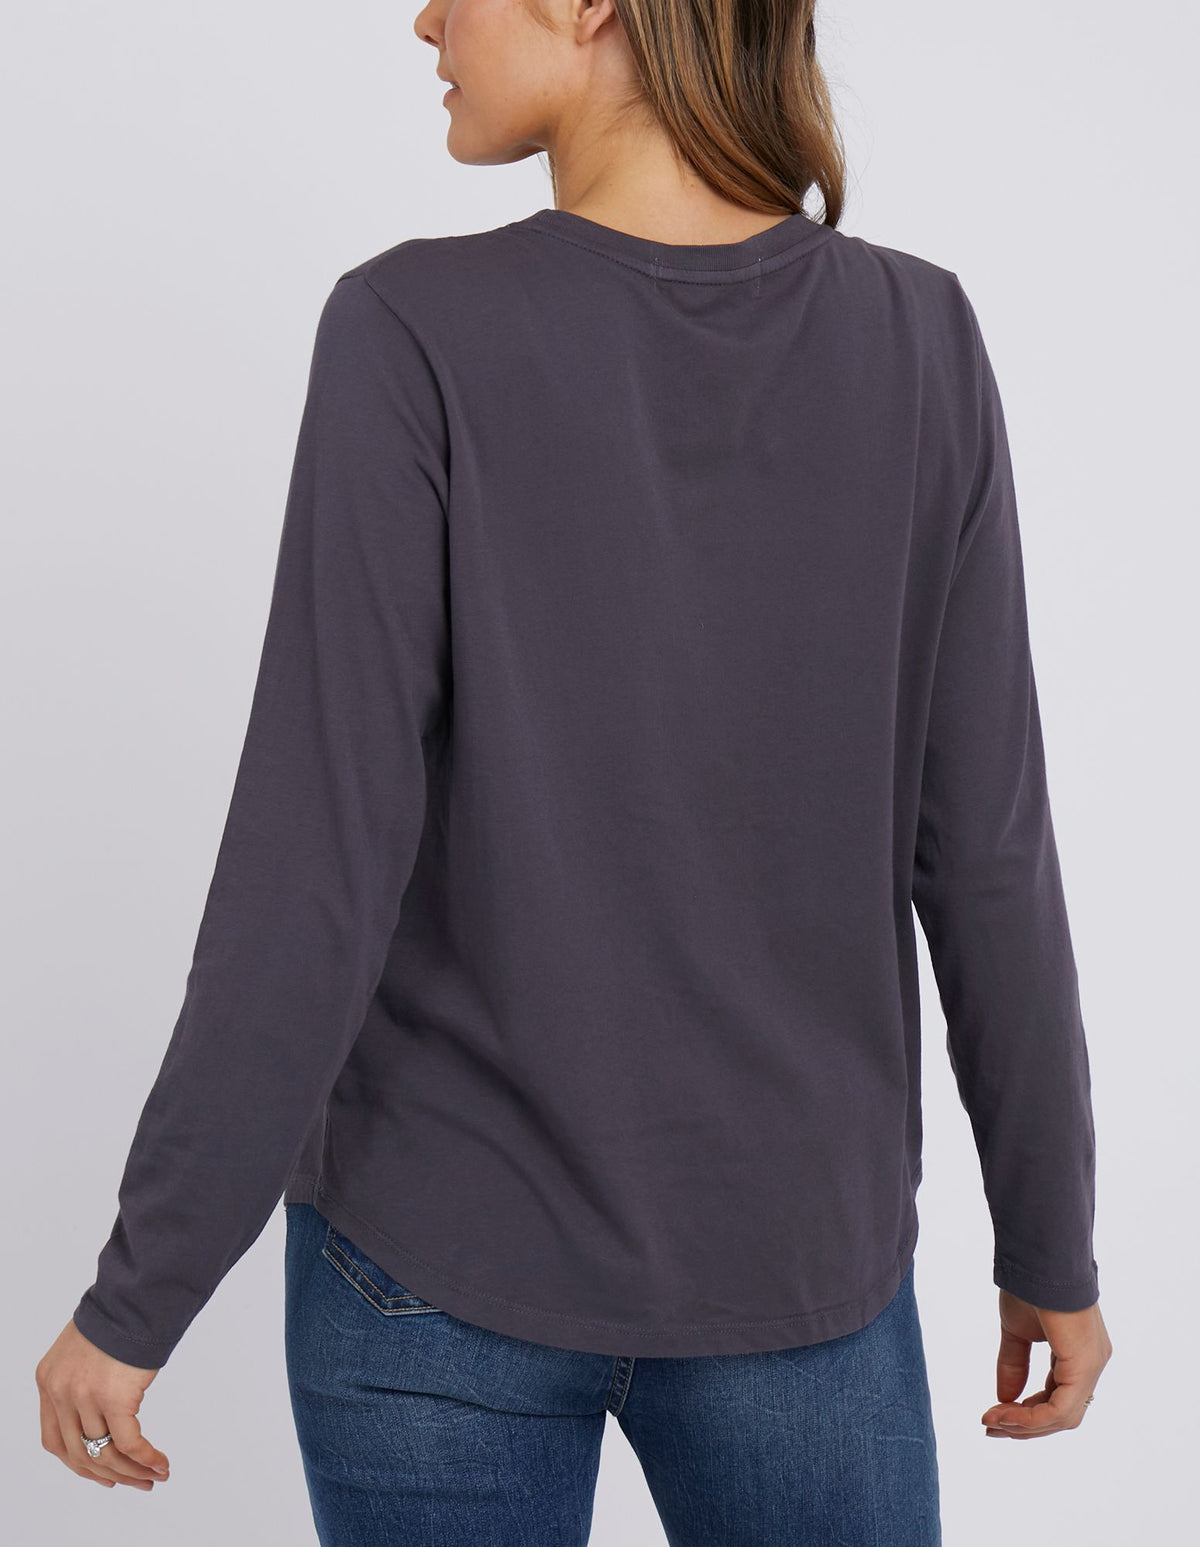 Manly Long Sleeve Tee - Coal - Foxwood - FUDGE Gifts Home Lifestyle